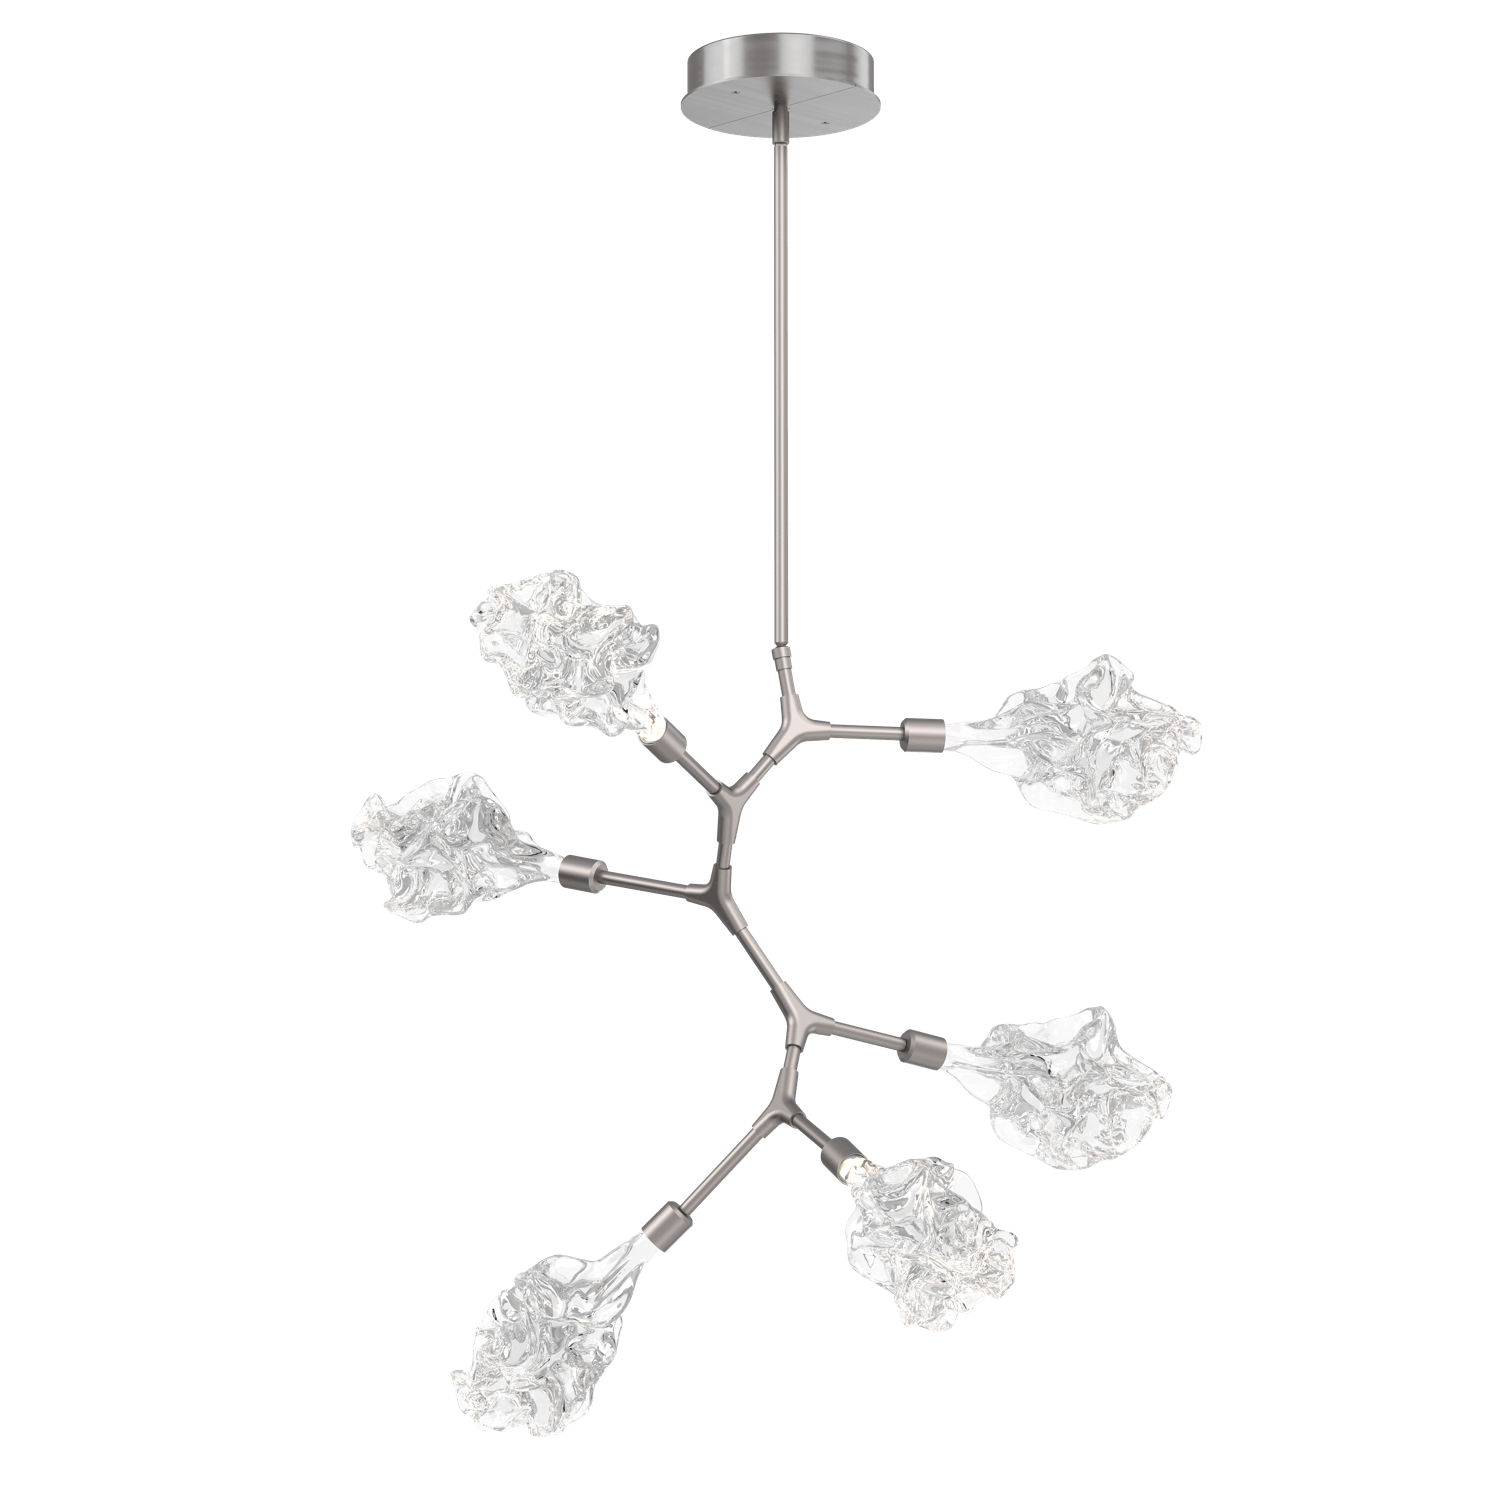 CHB0059-VA-SN-Hammerton-Studio-Blossom-6-light-organic-vine-chandelier-with-satin-nickel-finish-and-clear-handblown-crystal-glass-shades-and-LED-lamping